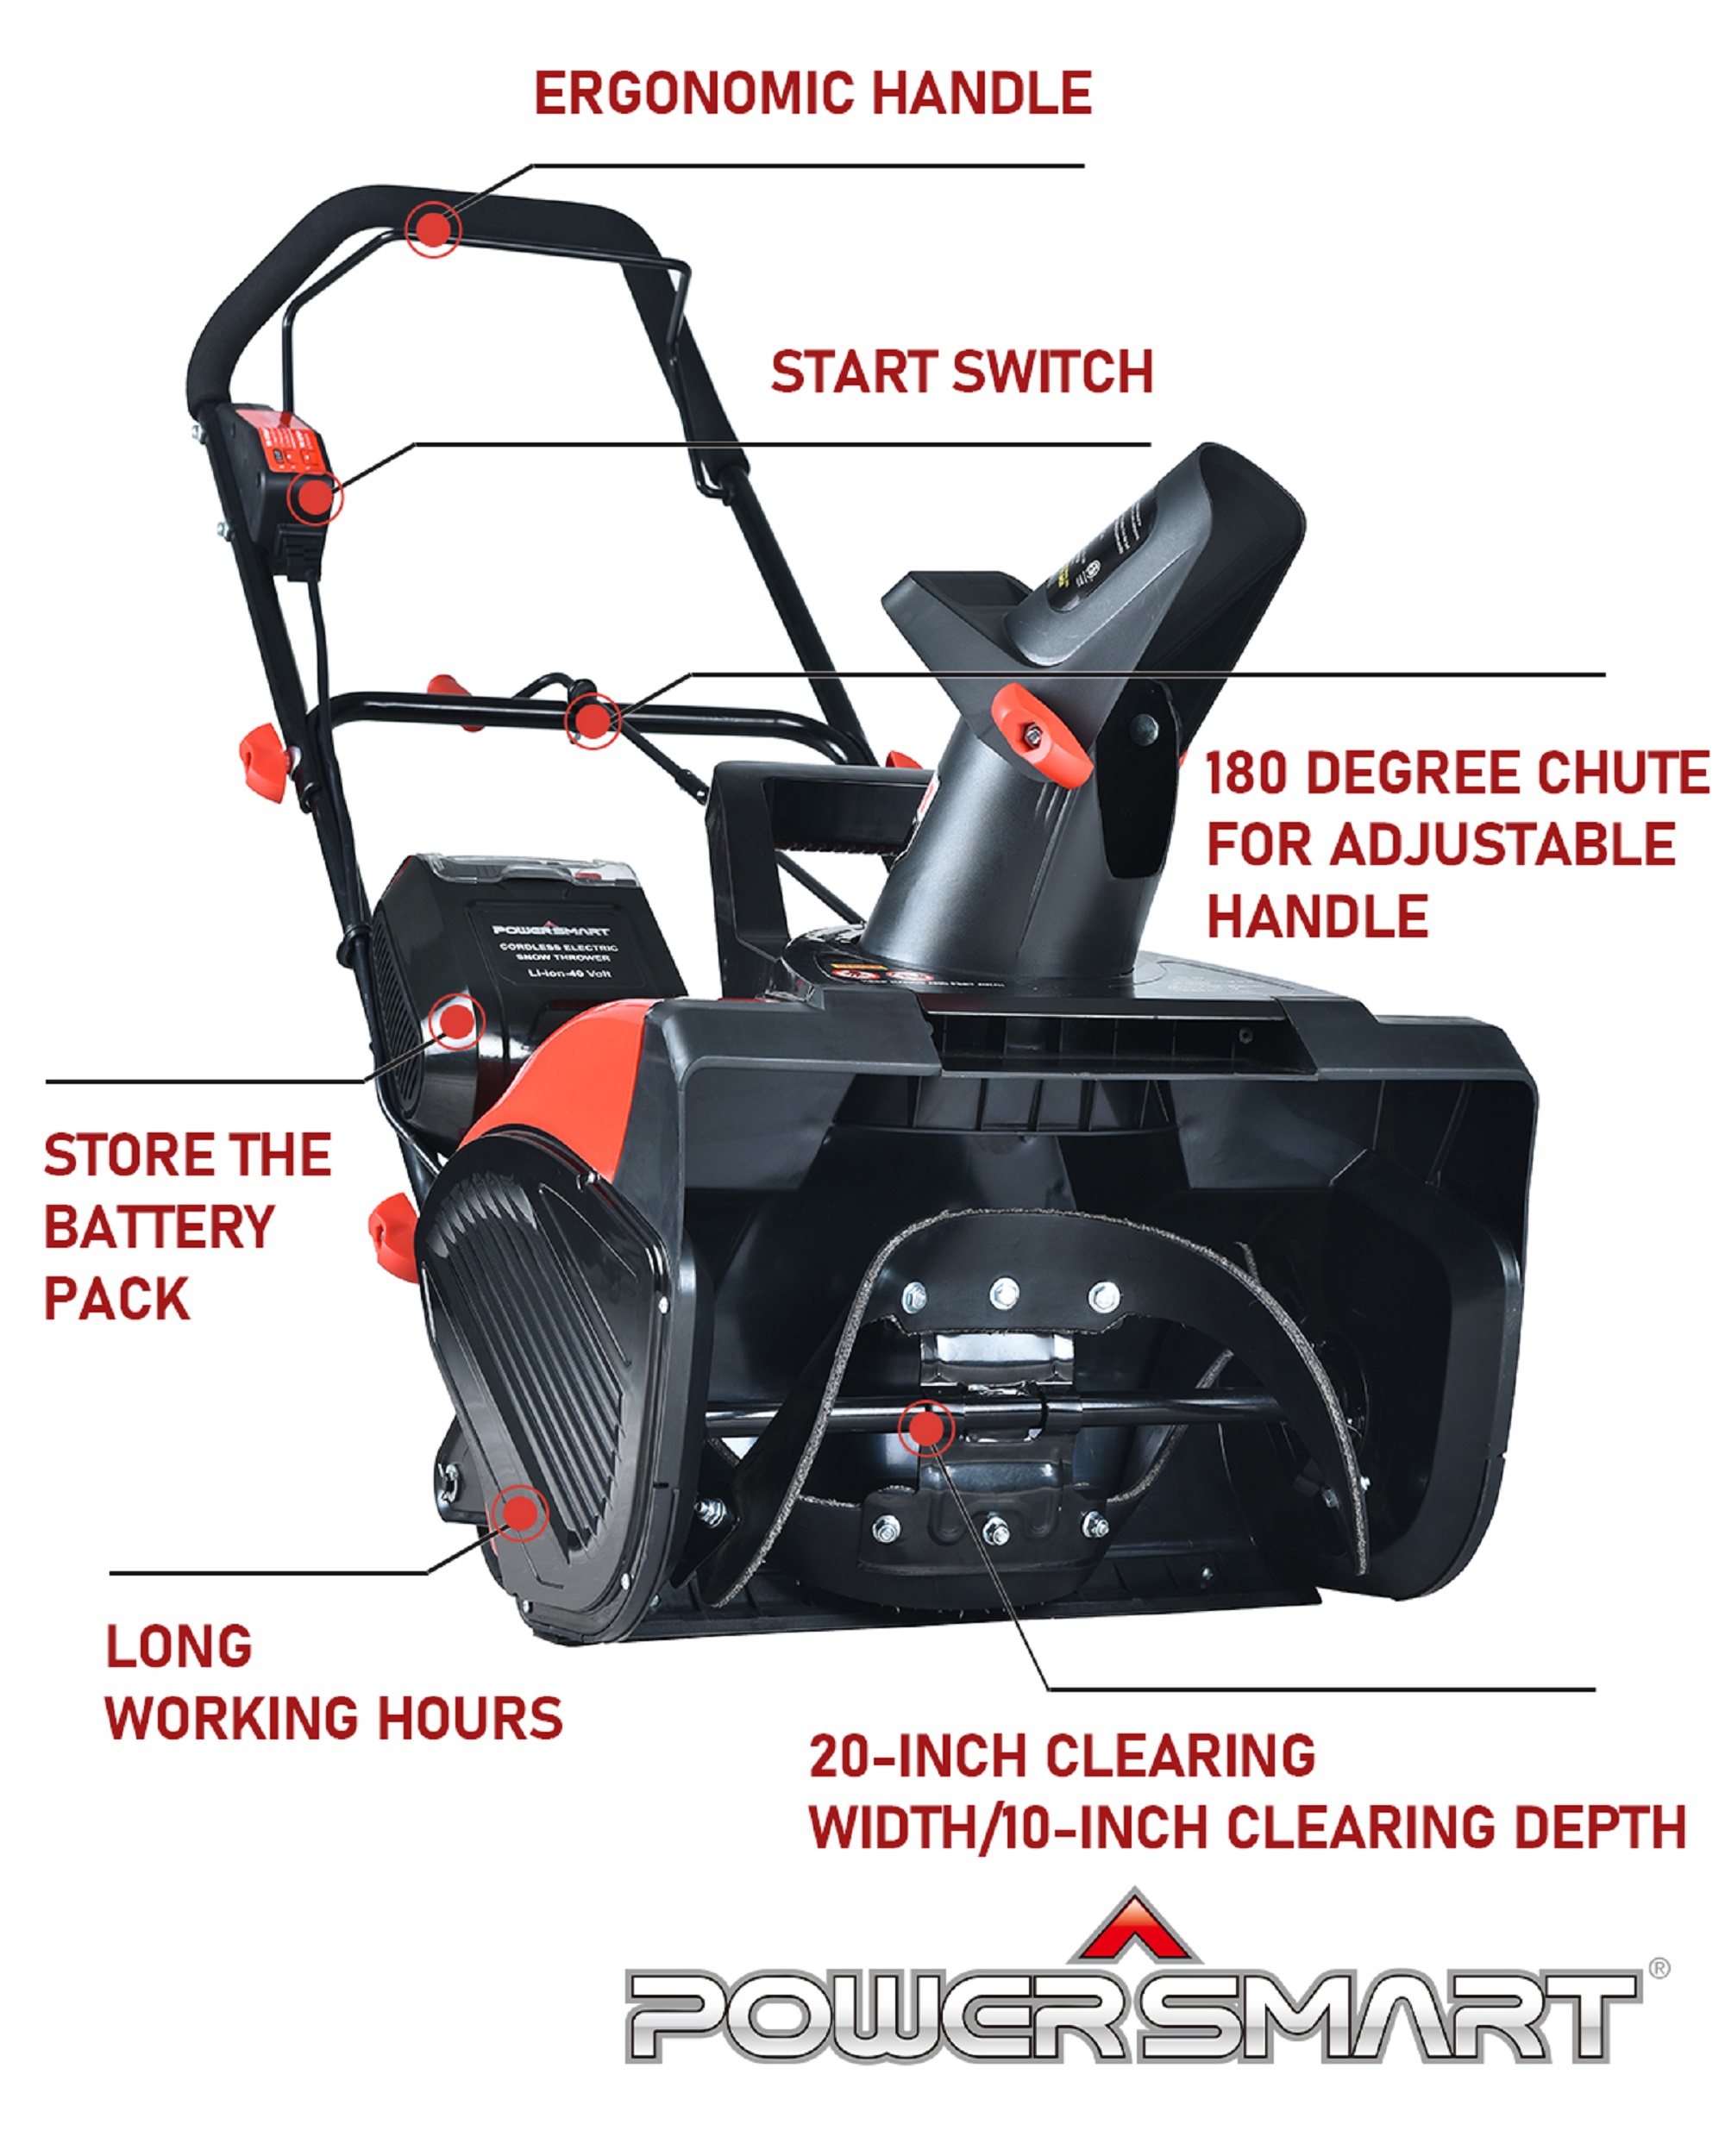 Powersmart 18 in. Cordless Lithium-Ion 40 Volt Snow Blower DB2401 - image 3 of 12